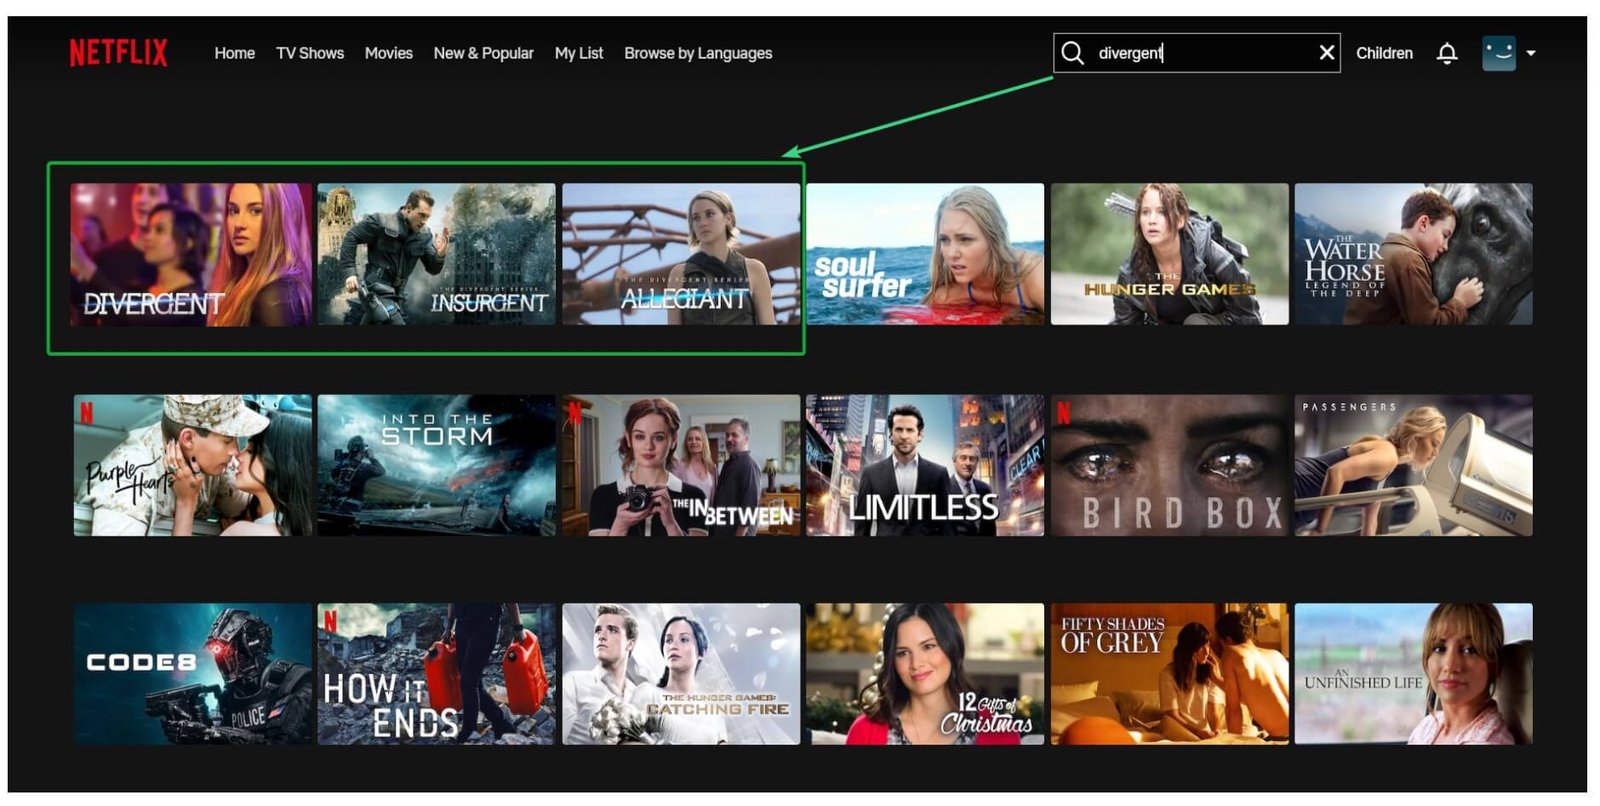 screenshot that shows all 3 Divergent movies are streaming on Netflix Canada